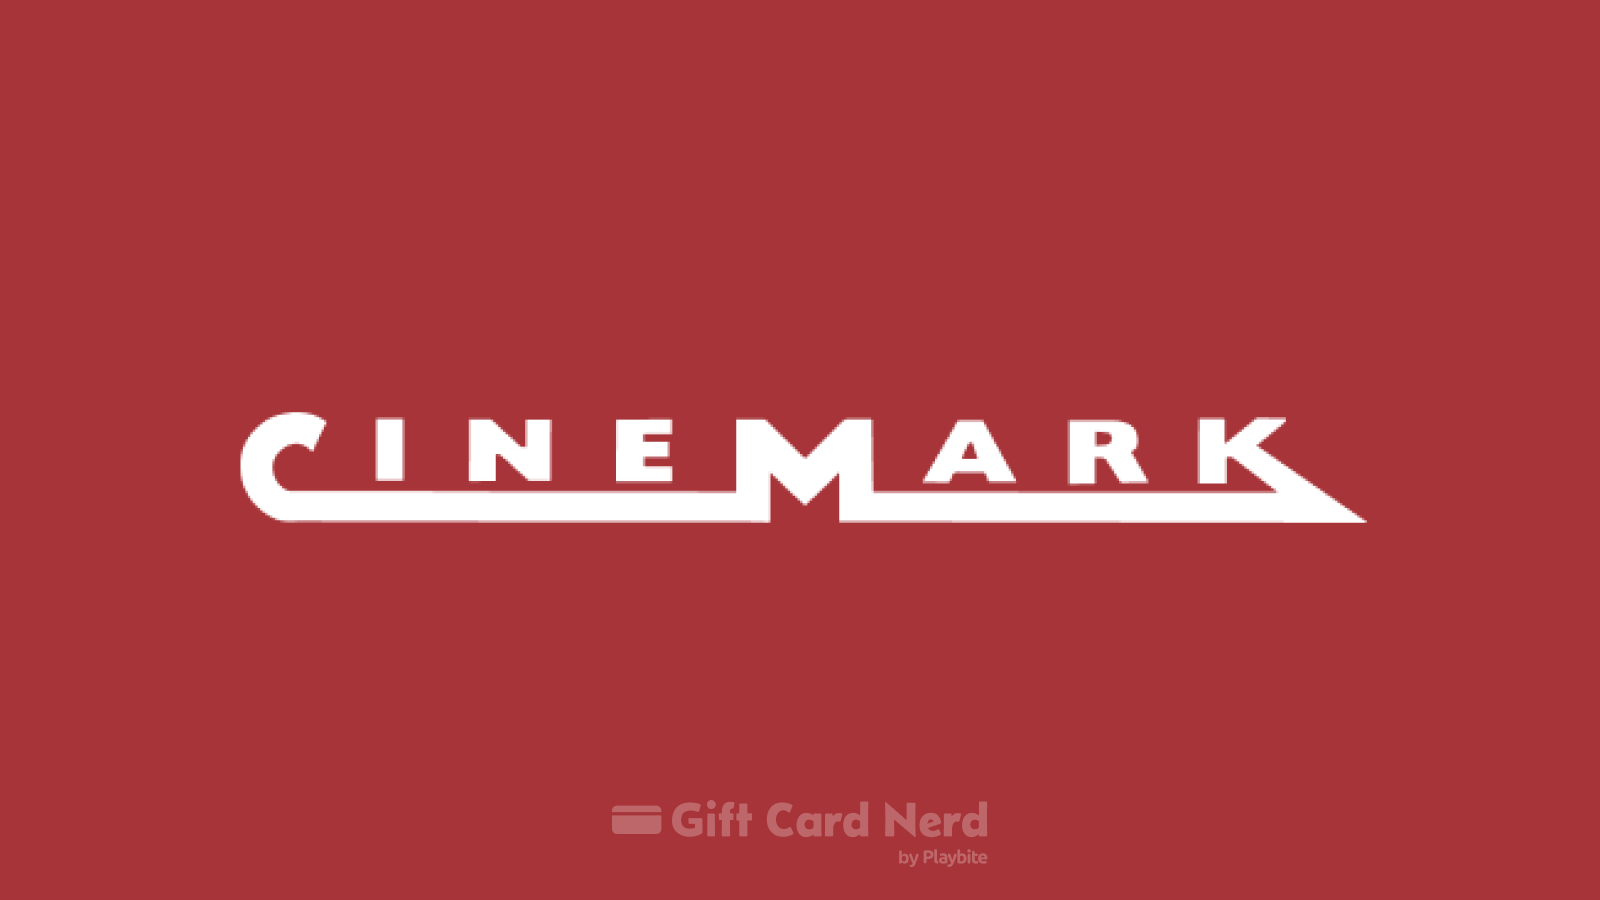 How to Check Your Cinemark Gift Card Balance